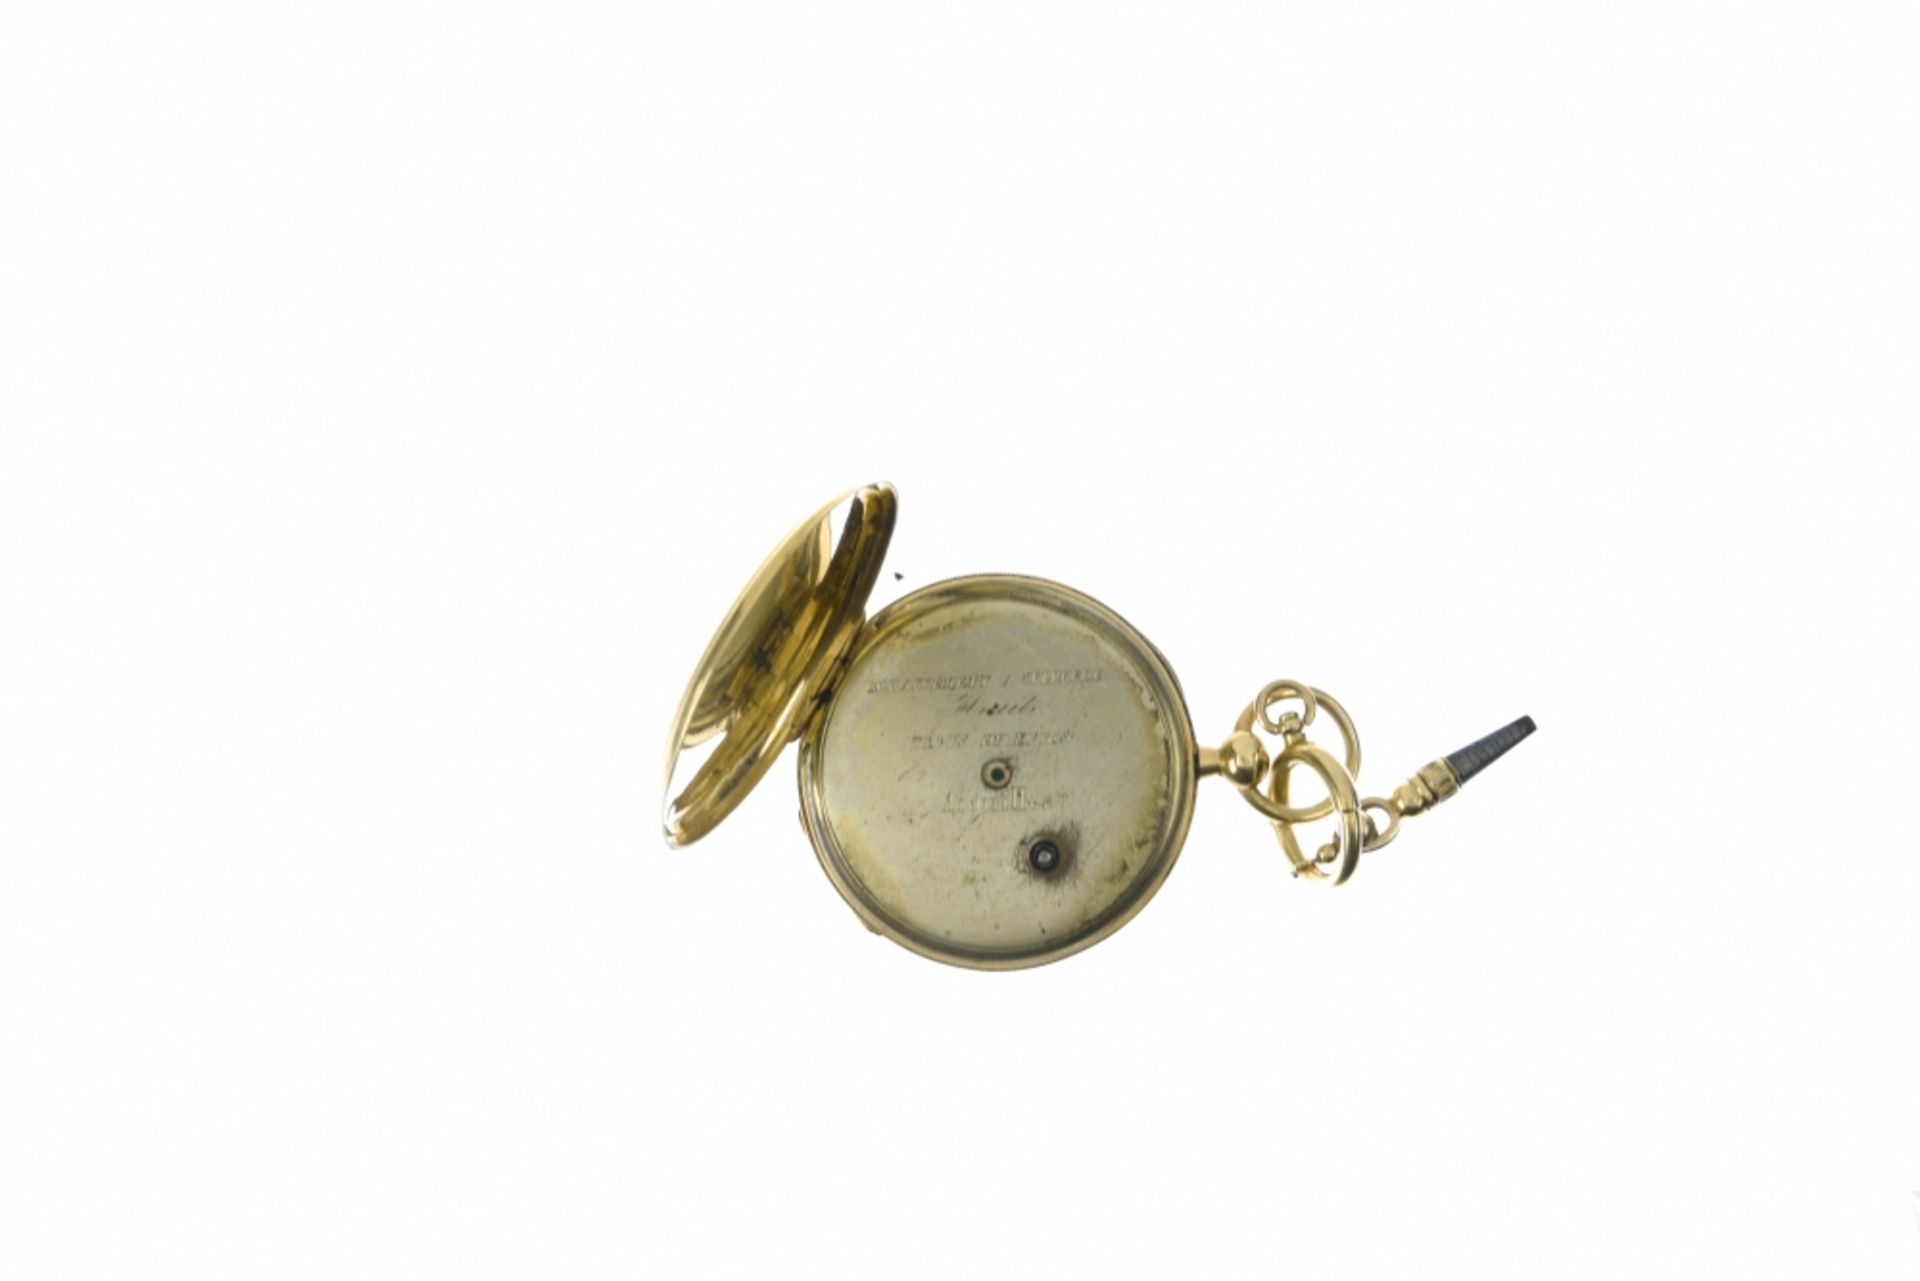 Lot of 3 fob watches 1. 18k gold fob watch Porcelain dial with Roman numerals and external rail - Image 3 of 9